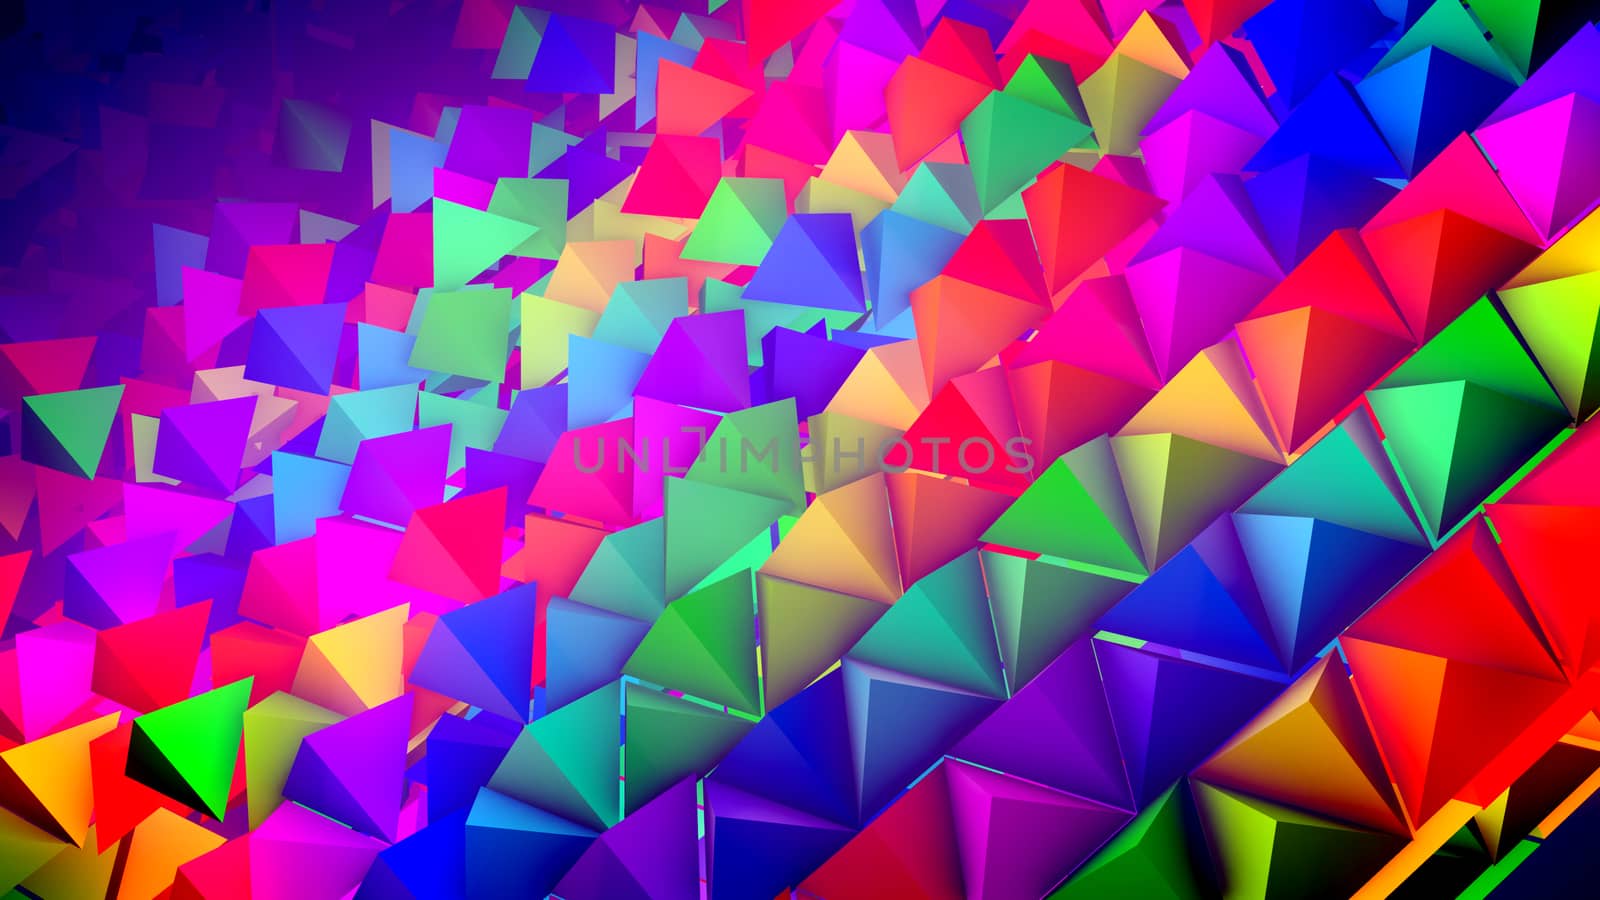 Optimistic 3d rendering of rainbow pyramids located on a slanted surface in straight and long rows with their sharp tops aimed up. It looks optimistic, innovative, and funny.